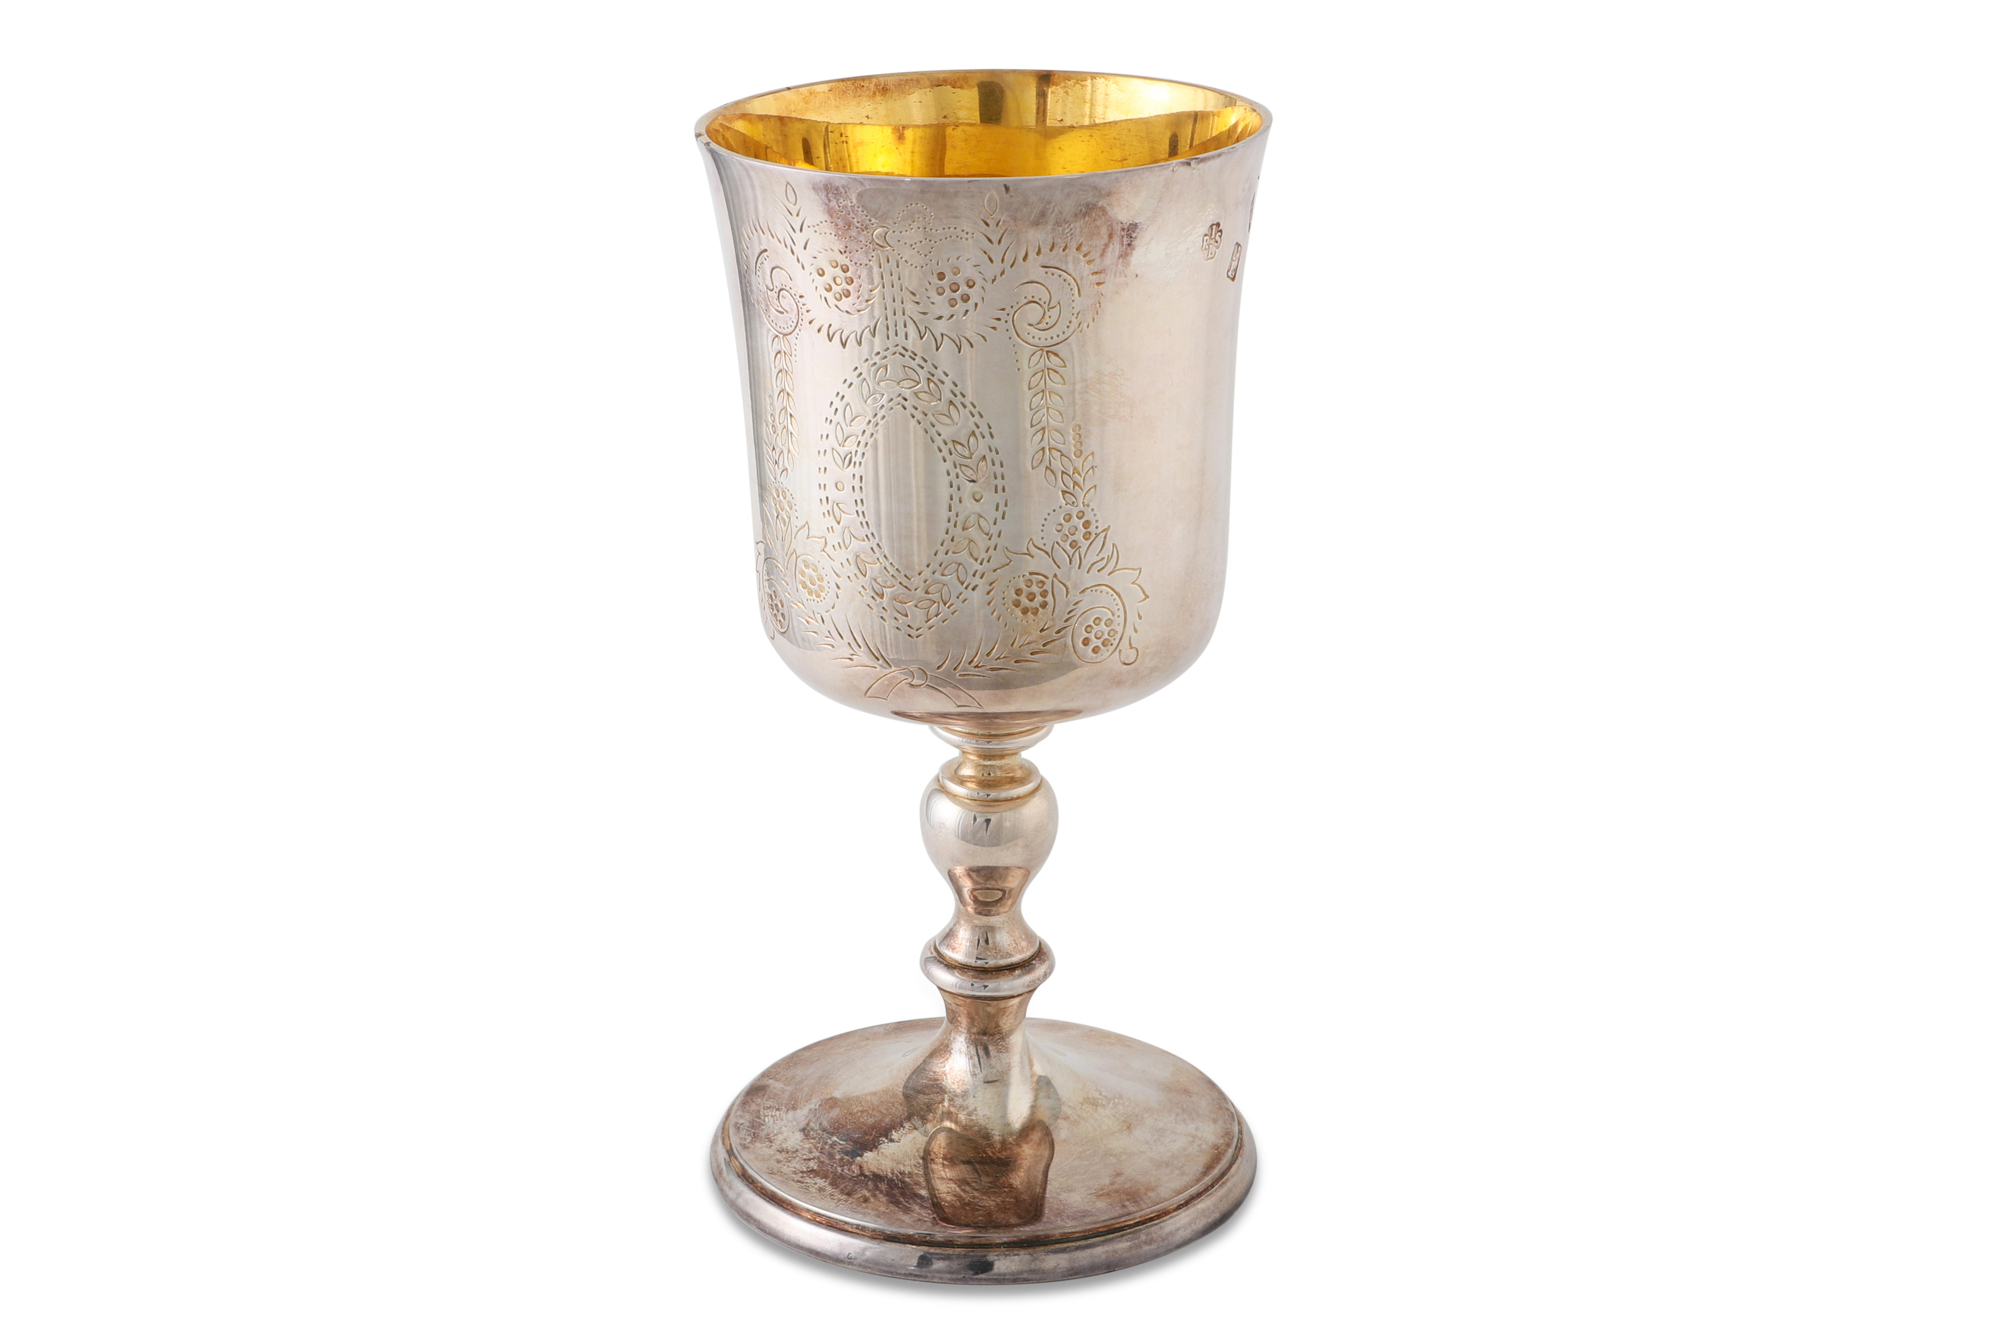 A LATE 20TH CENTURY IRISH SILVER GILT CHALICE/GOBLET, with engraved decoration, raised over a